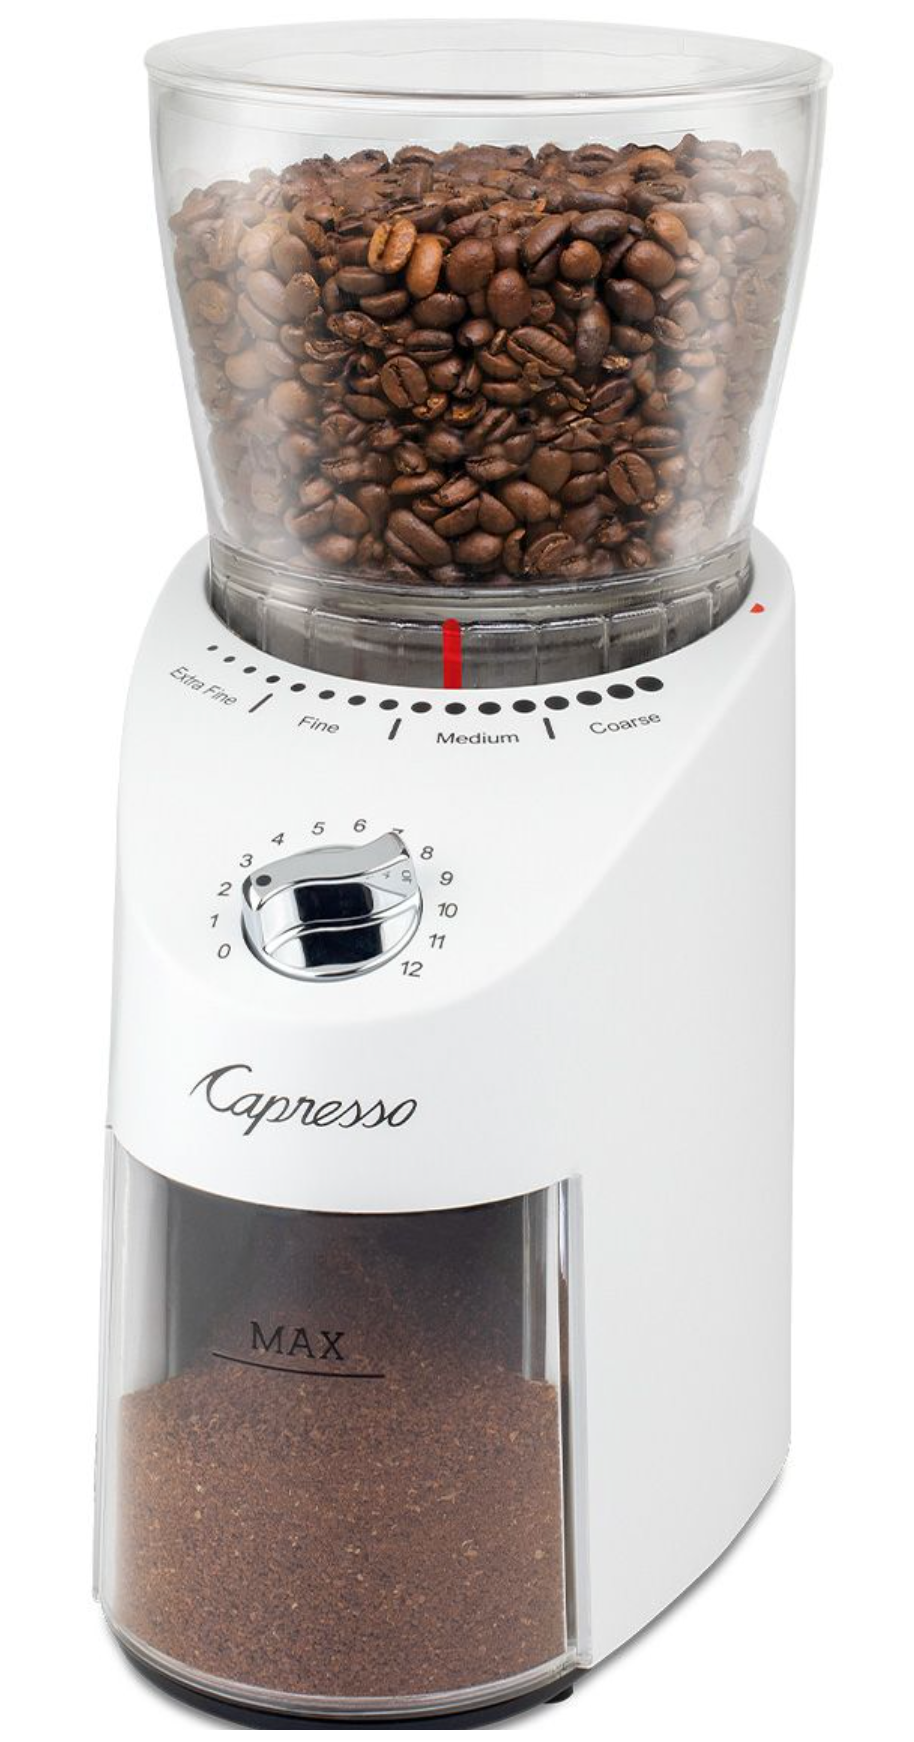 Infinity Conical Burr Grinder, Stainless Steel